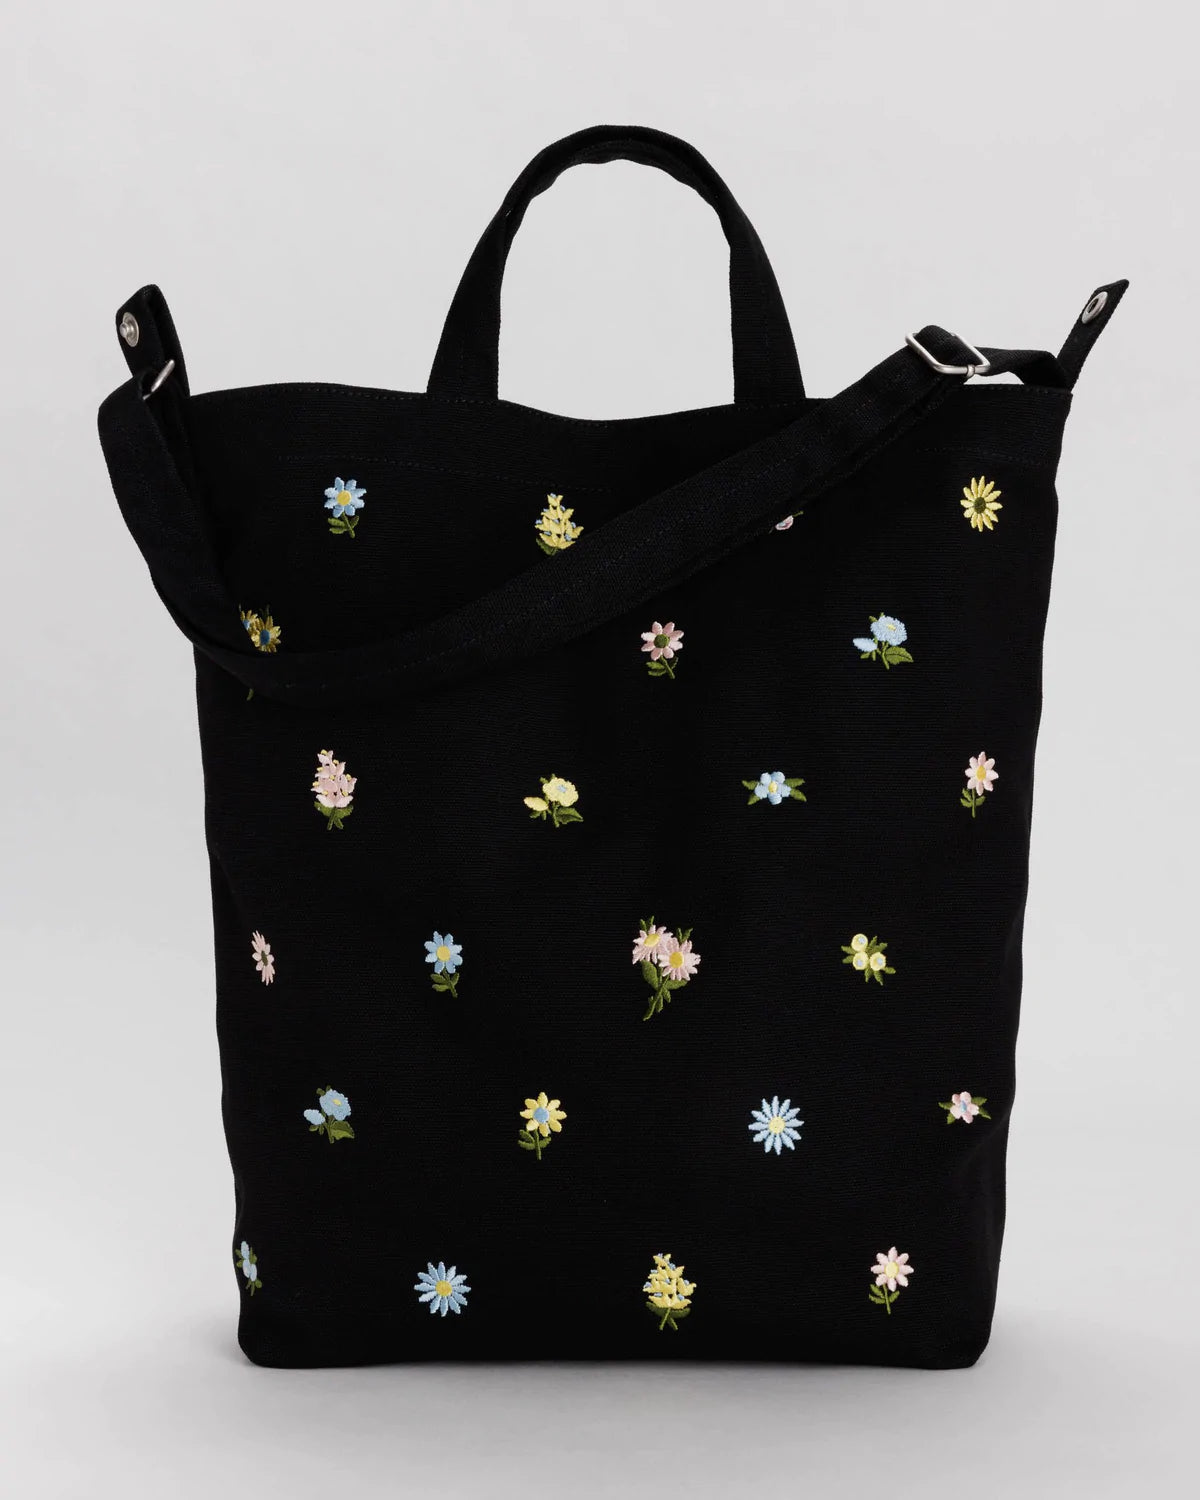 Duck Bag - Embroidered Ditsy Floral Black